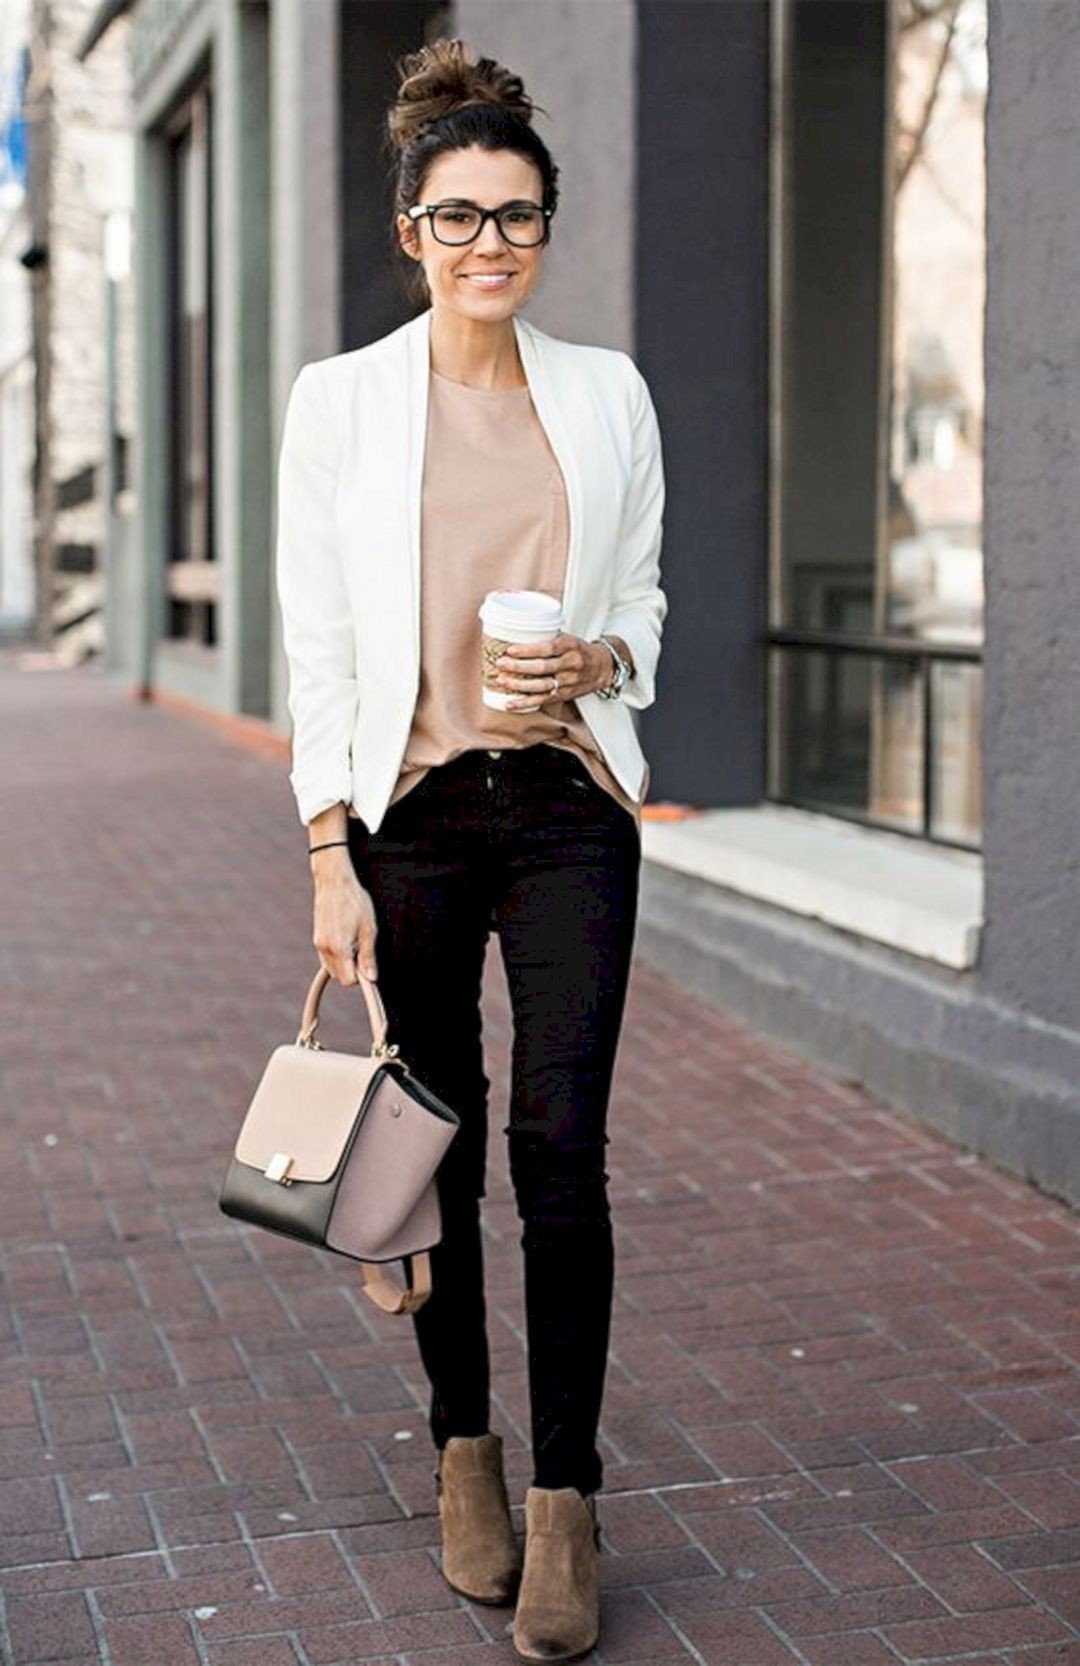 Business casual women outfits, business casual, street fashion